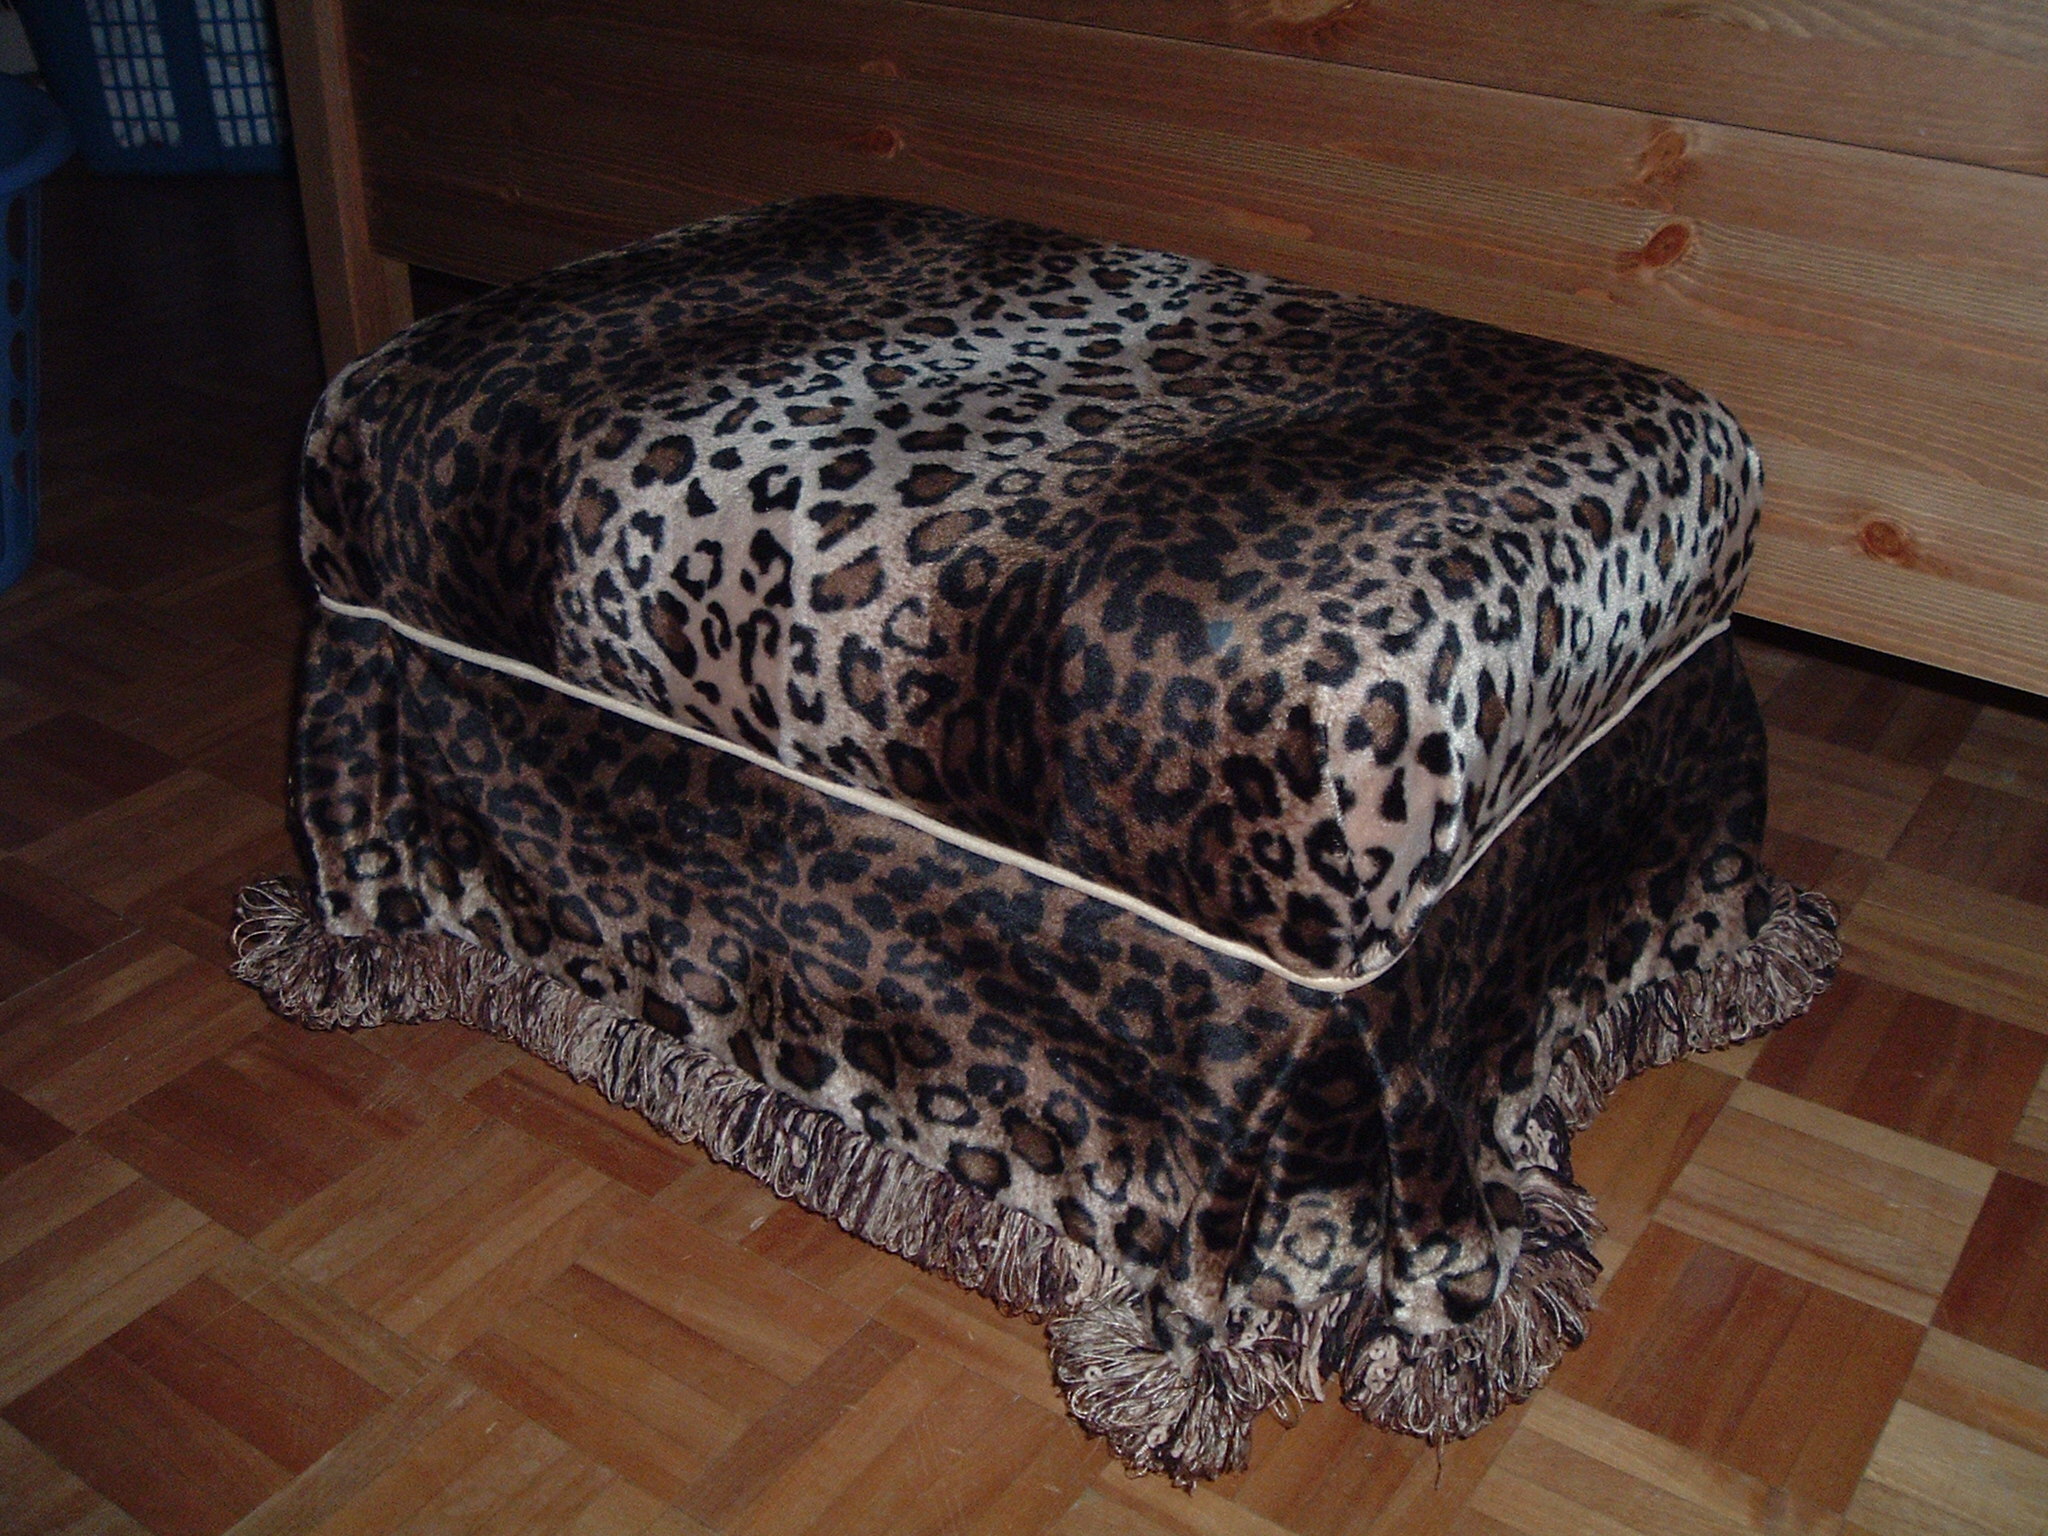 Leopard print covered ottoman